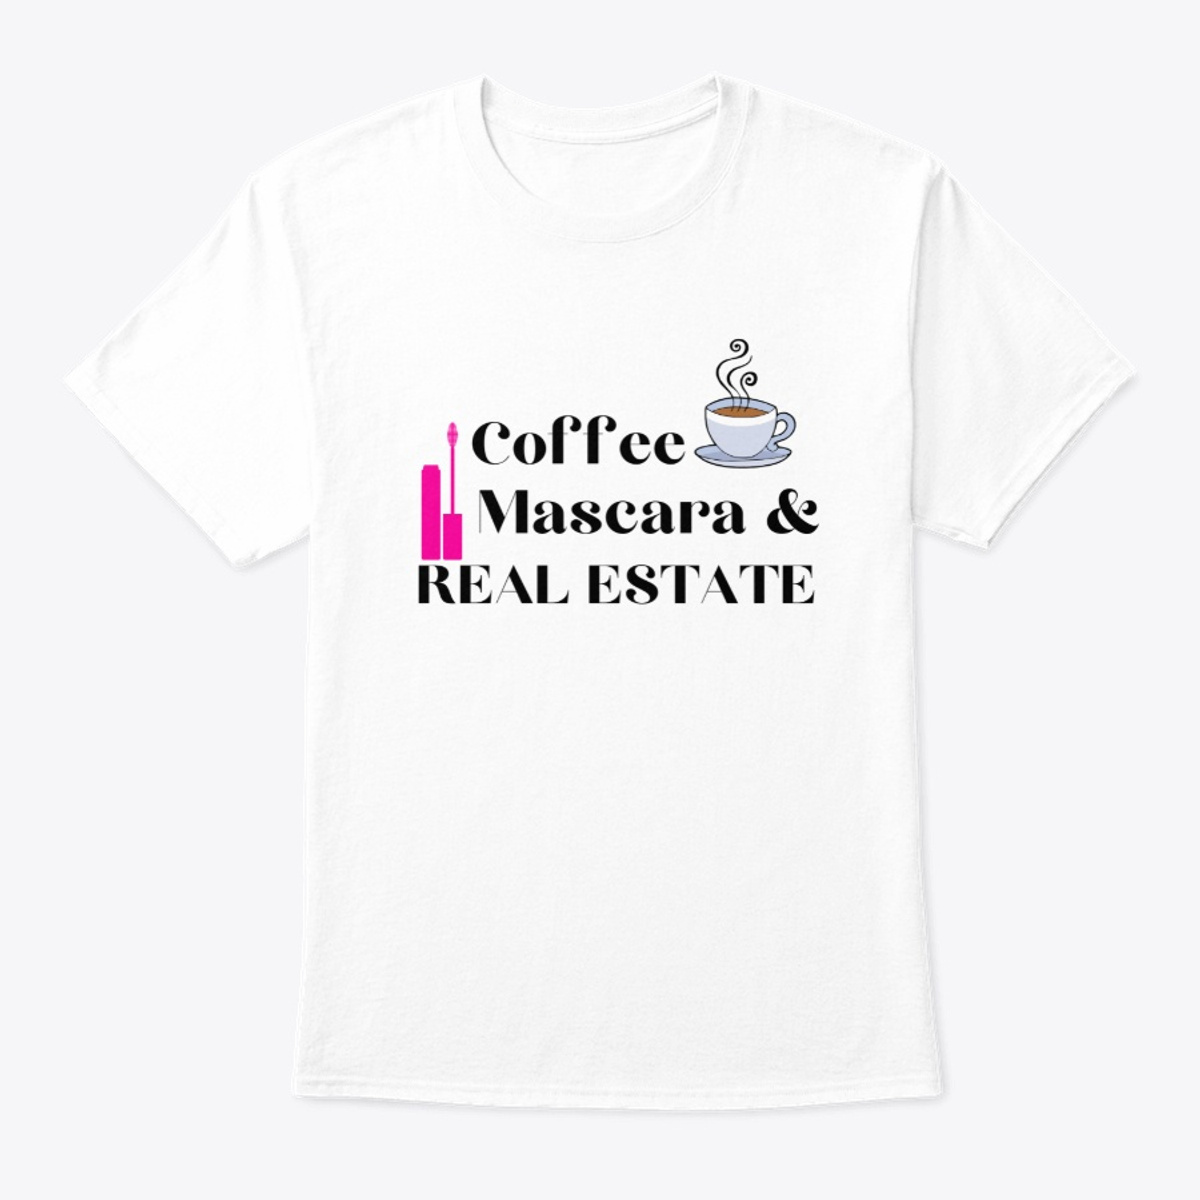 Plus and Extended Sizes Available! Coffee Mascara & Real Estate Realtor Shirt Short-Sleeve Soft Unisex Ladies Women's Men's T-Shirt Tee